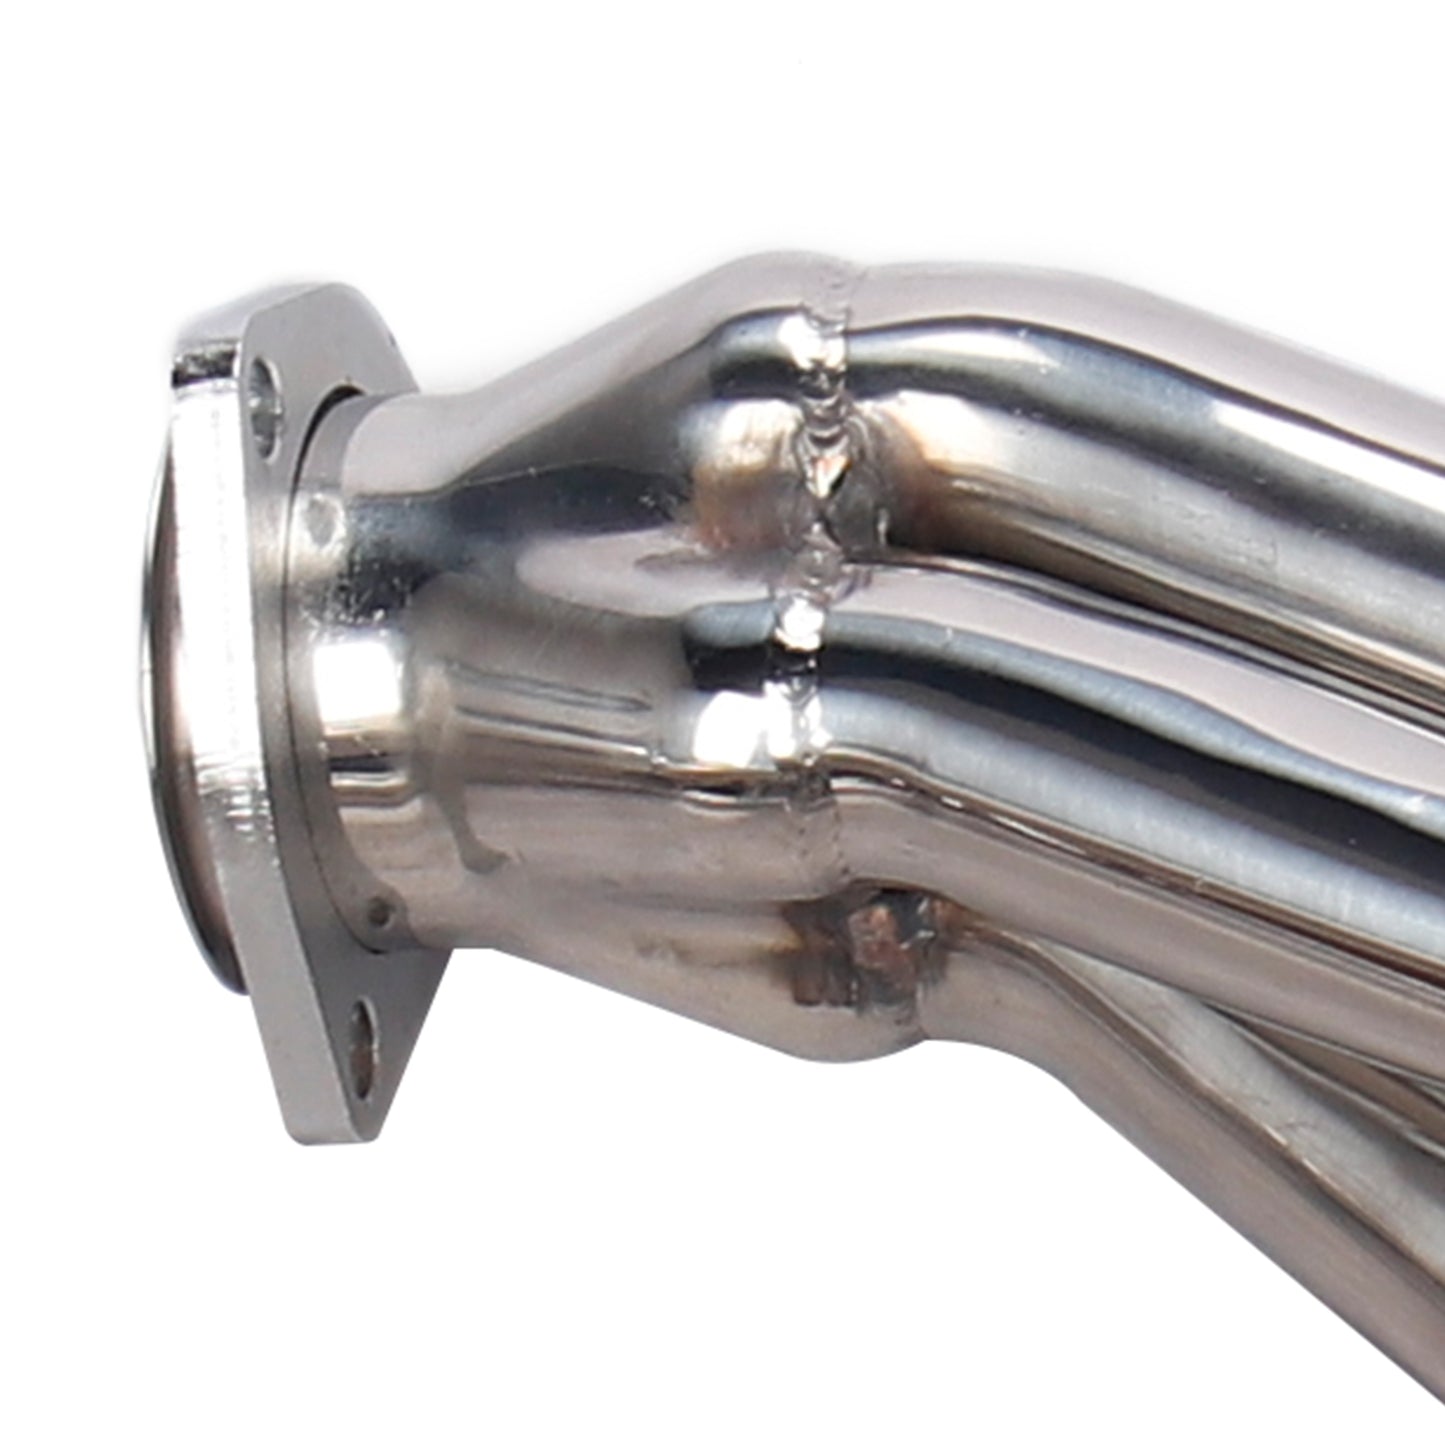 Header Exhaust pipes Fits Small Block Chevy Blazer S10 S15 2WD 350 V8 GMC Engine Swap SS Headers